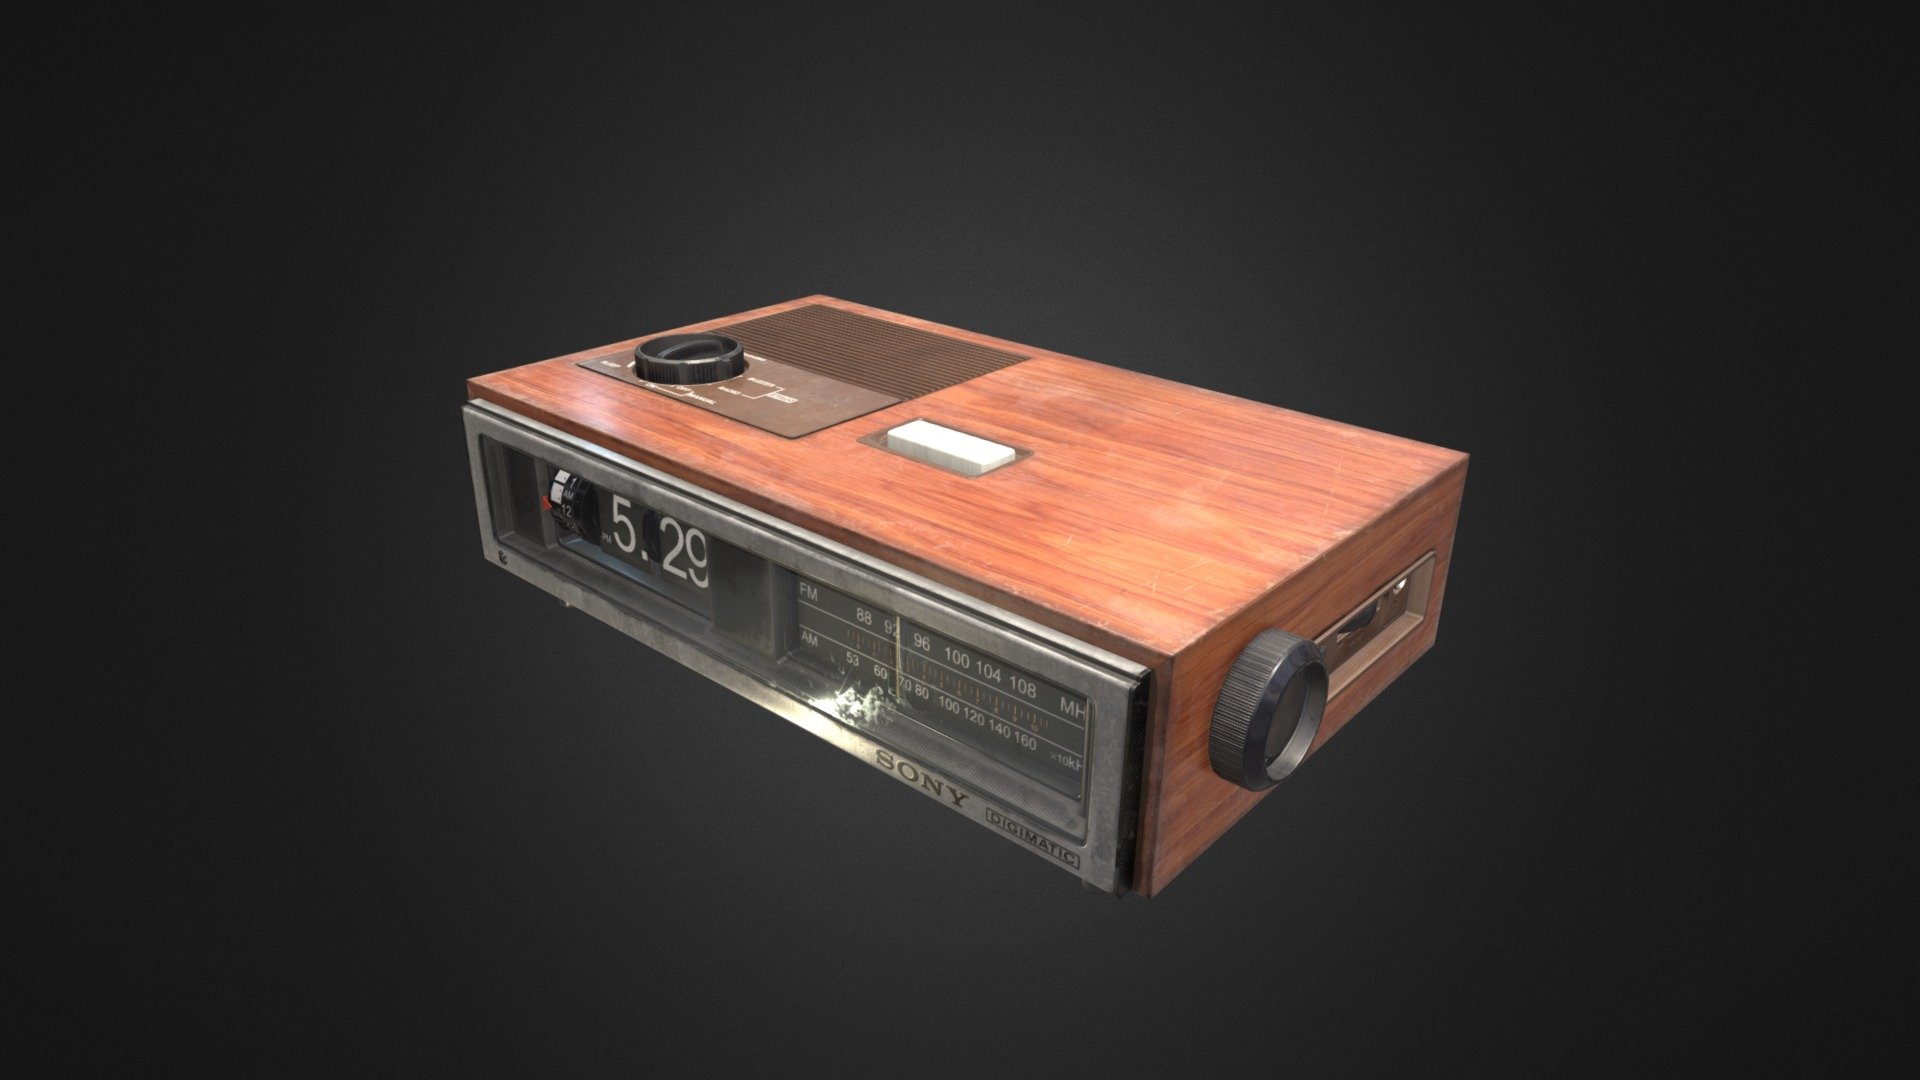 Sony vintage alarm clock model made in Blender with 4k textures.
If you like my model you can like and leave a comment
Have fun) - Vintage Sony Digimatic Flip Clock Radio - Download Free 3D model by petshopboy6900 3d model